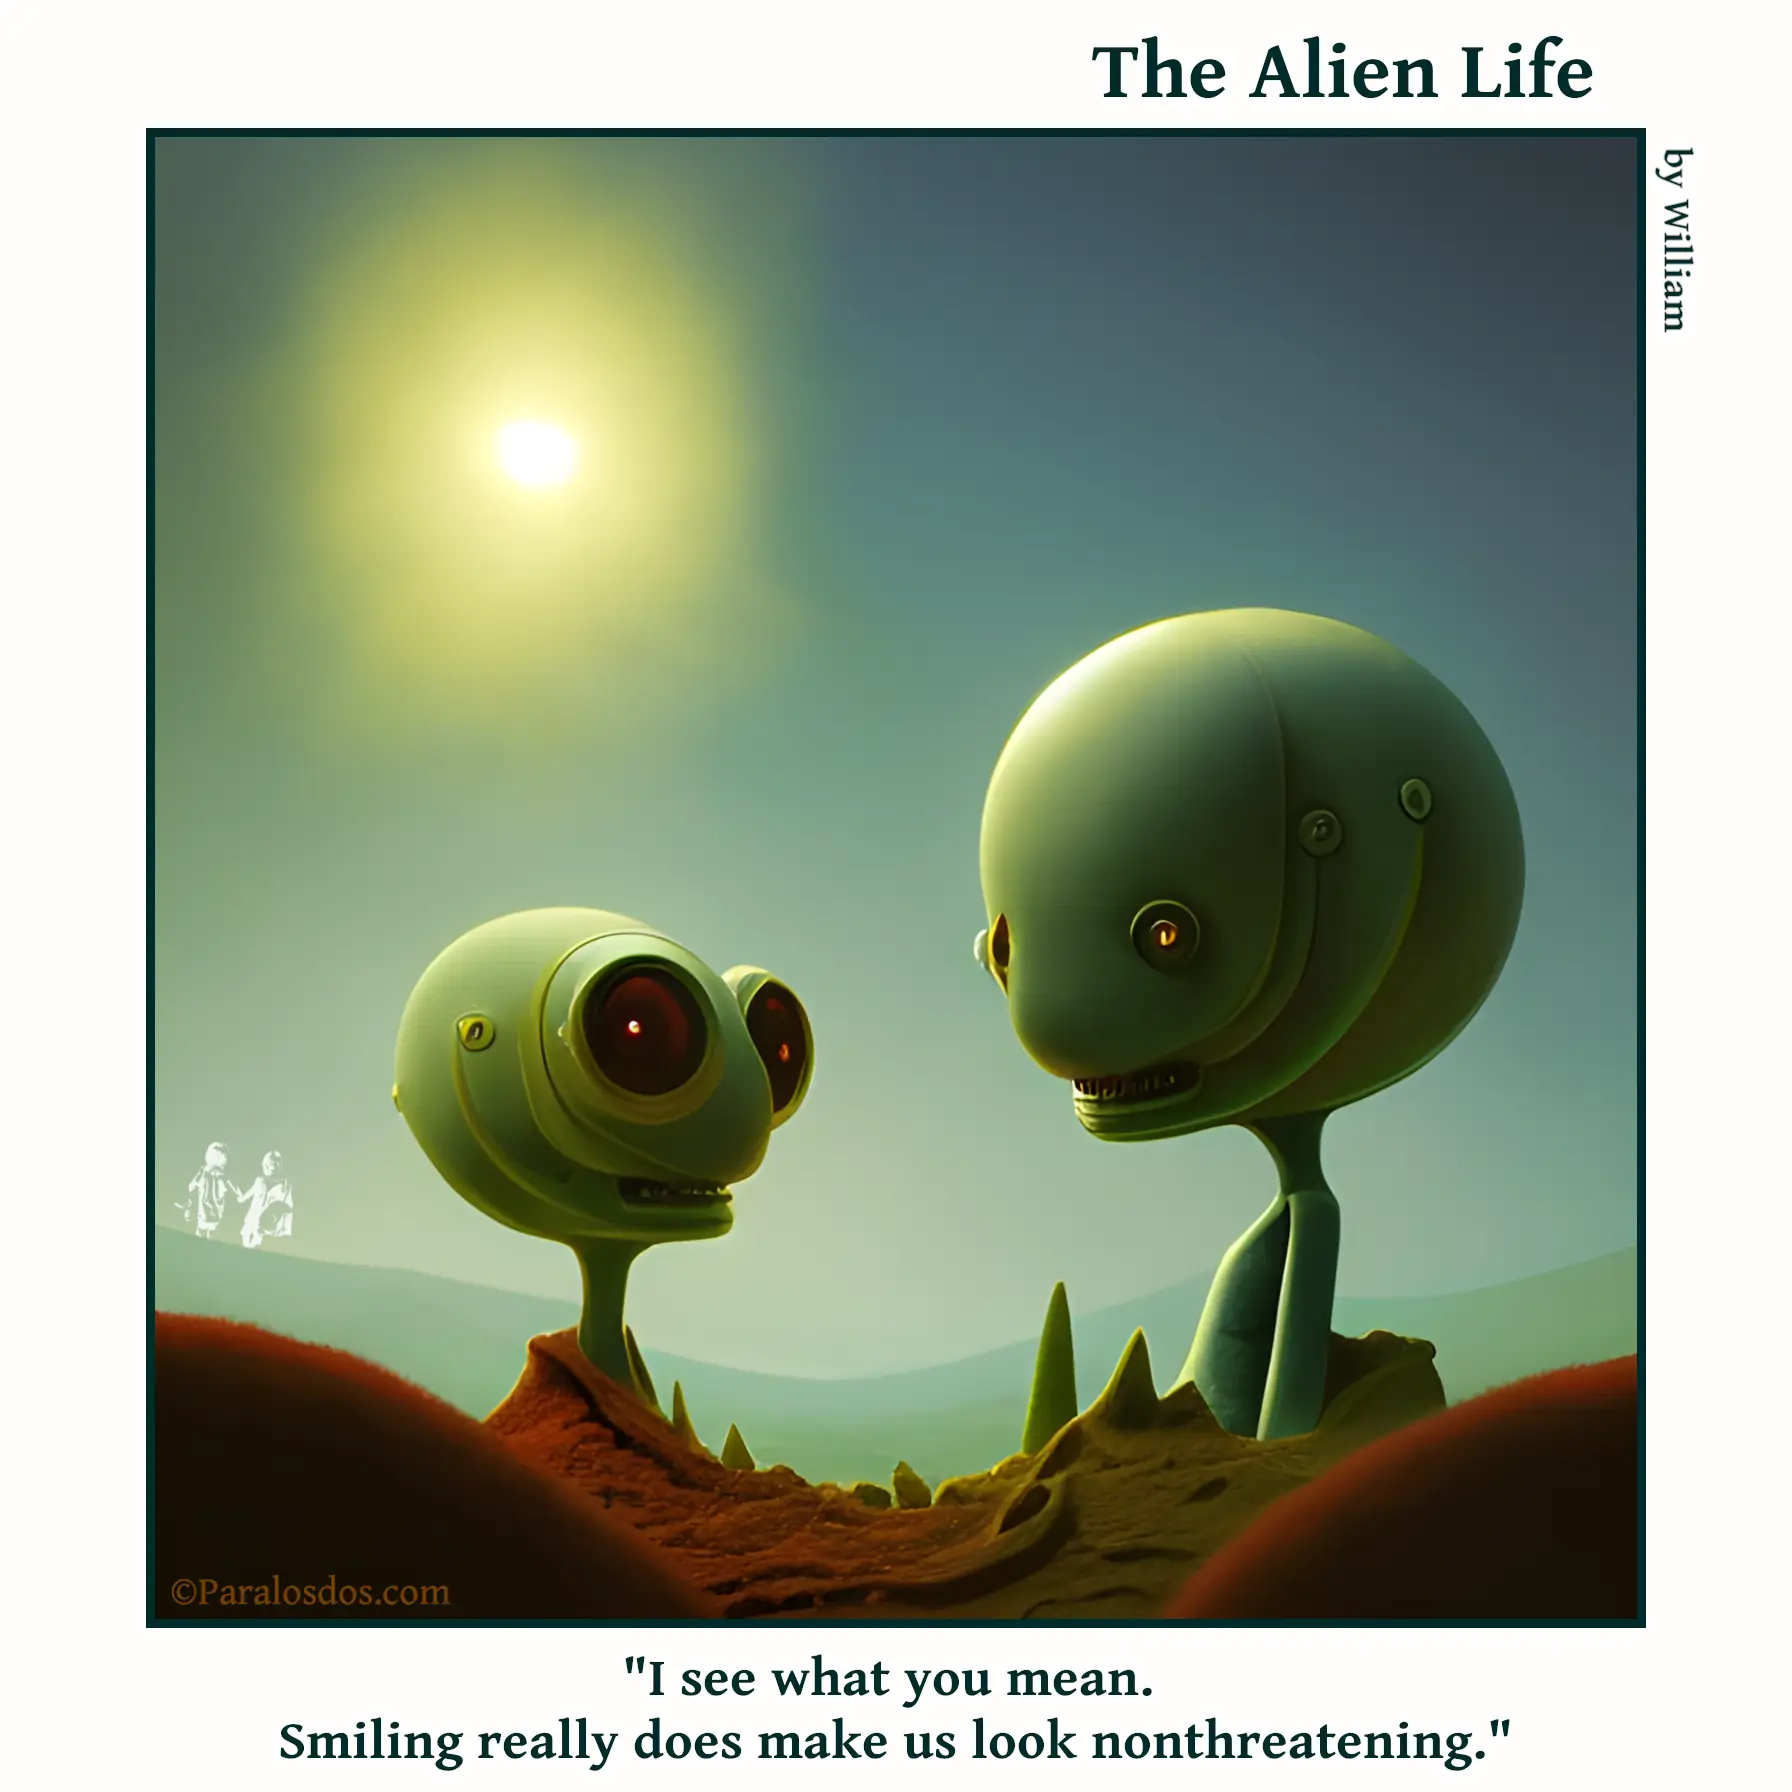 The Alien Life, one panel Comic. Two aliens are facing each other, they are very weird and scary looking. The caption reads: "I see what you mean. Smiling really does make us look nonthreatening."